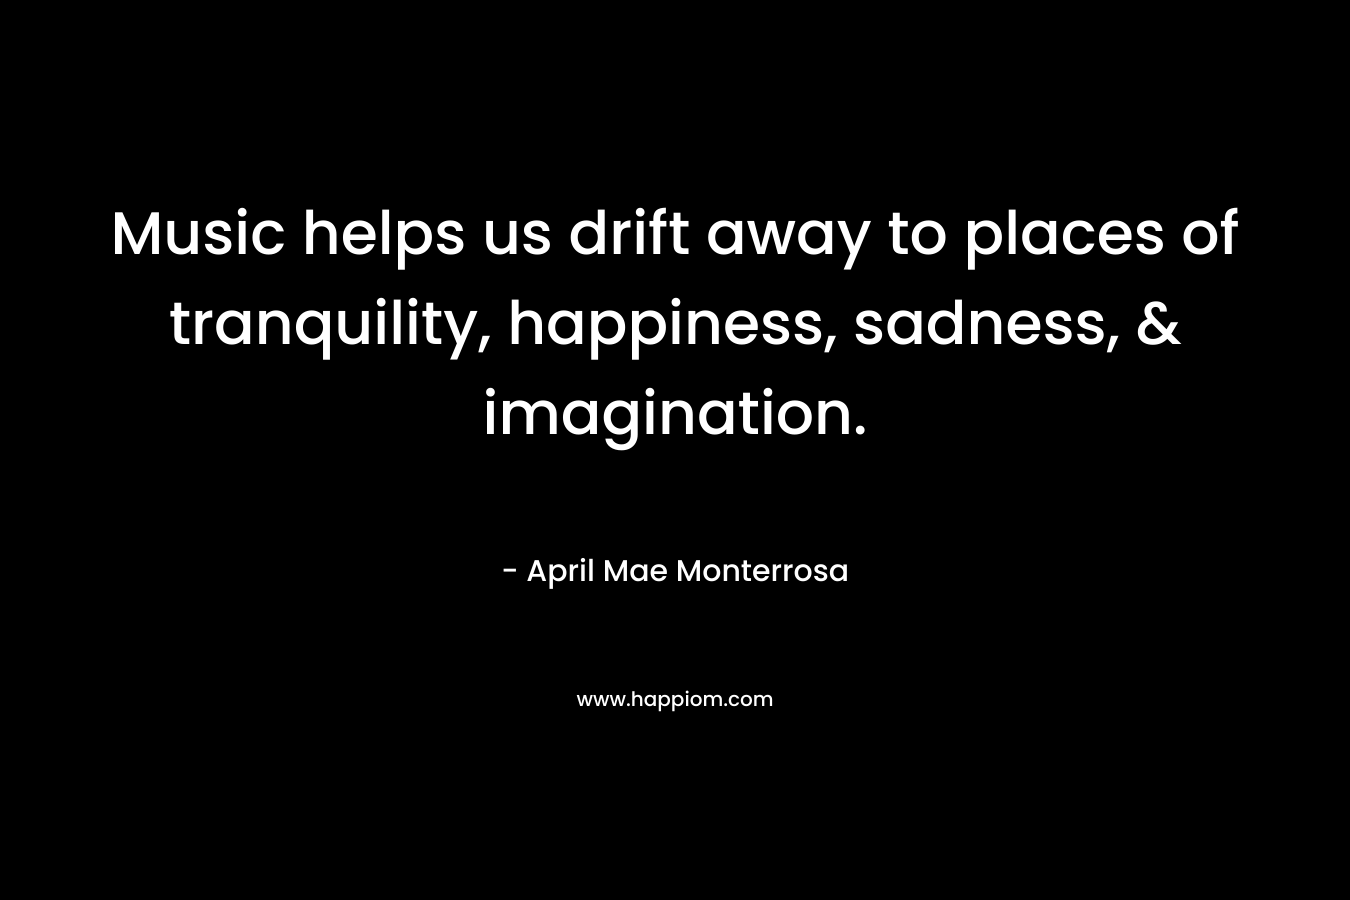 Music helps us drift away to places of tranquility, happiness, sadness, & imagination.